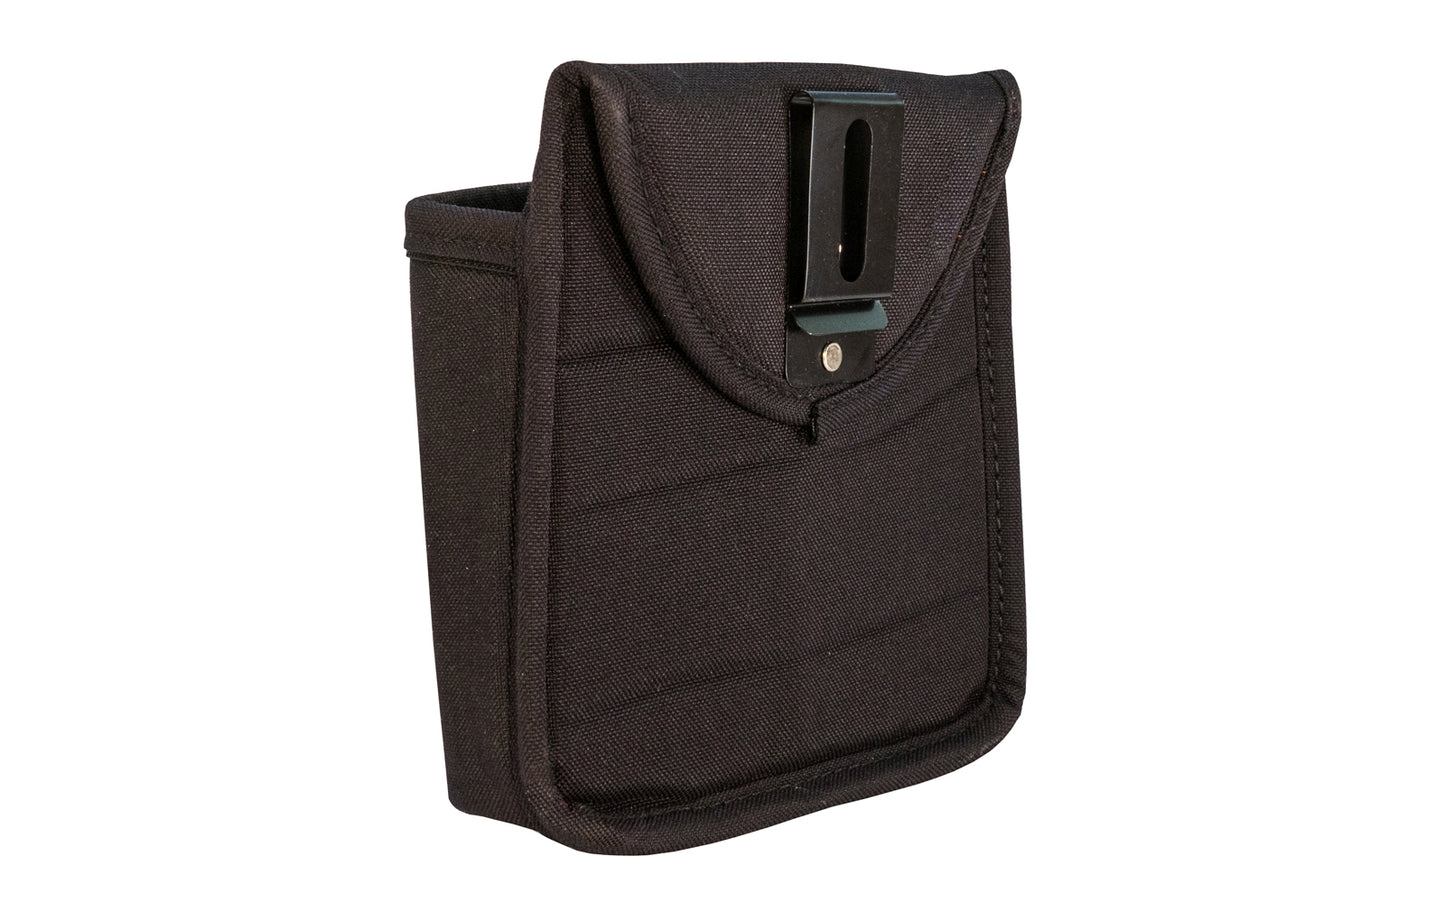 Occidental Leather Clip-On Large Pouch - Model 9503 ~ This bag by Occidental Leather is a cost efficient fastener & tool management clip-on pouch. The bag has an angle square holster pouch as well. Perfect for small jobs or the do it yourself weekend projects. Made of Nylon & genuine Leather - 759244175202